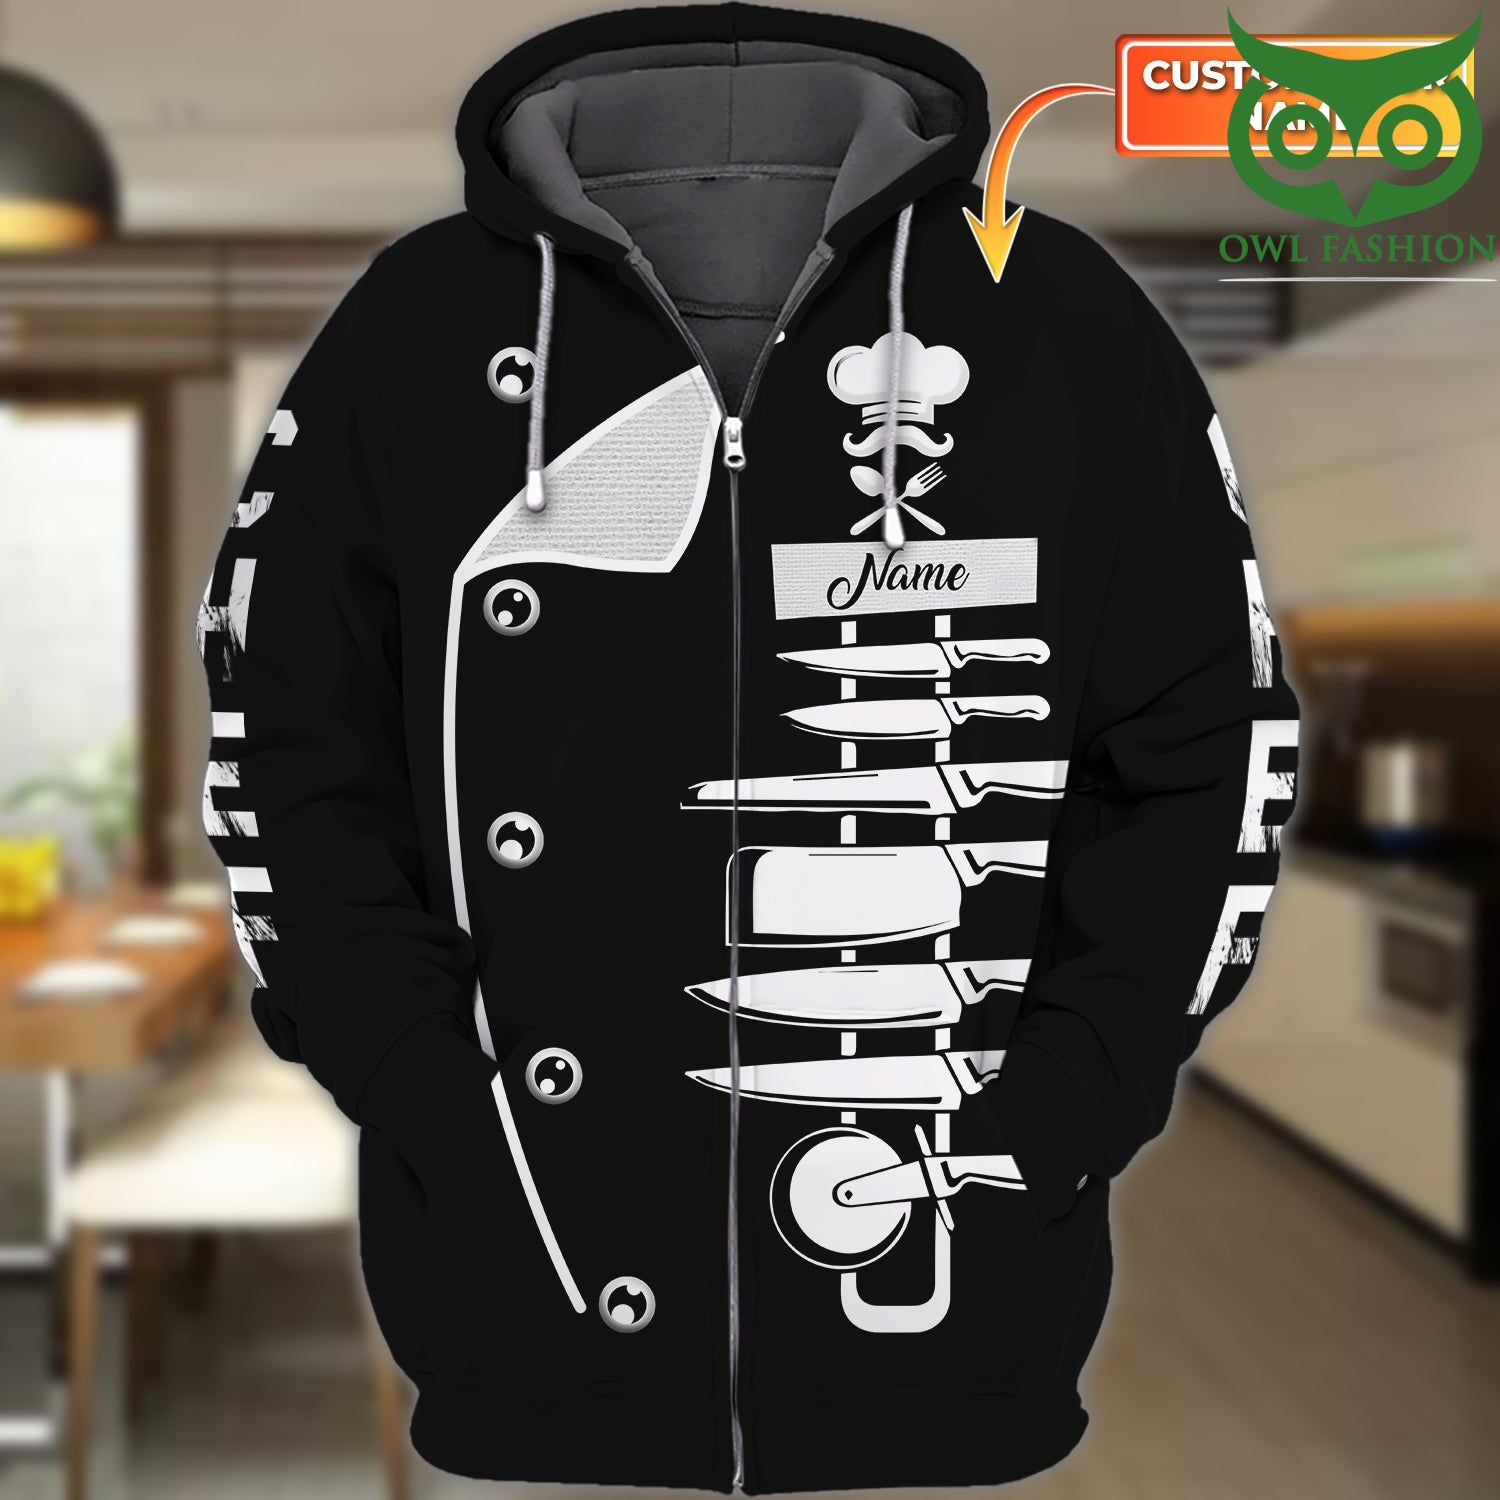 61 Chef Cooking Lovers Personalized Name black 3D Zipper Hoodie